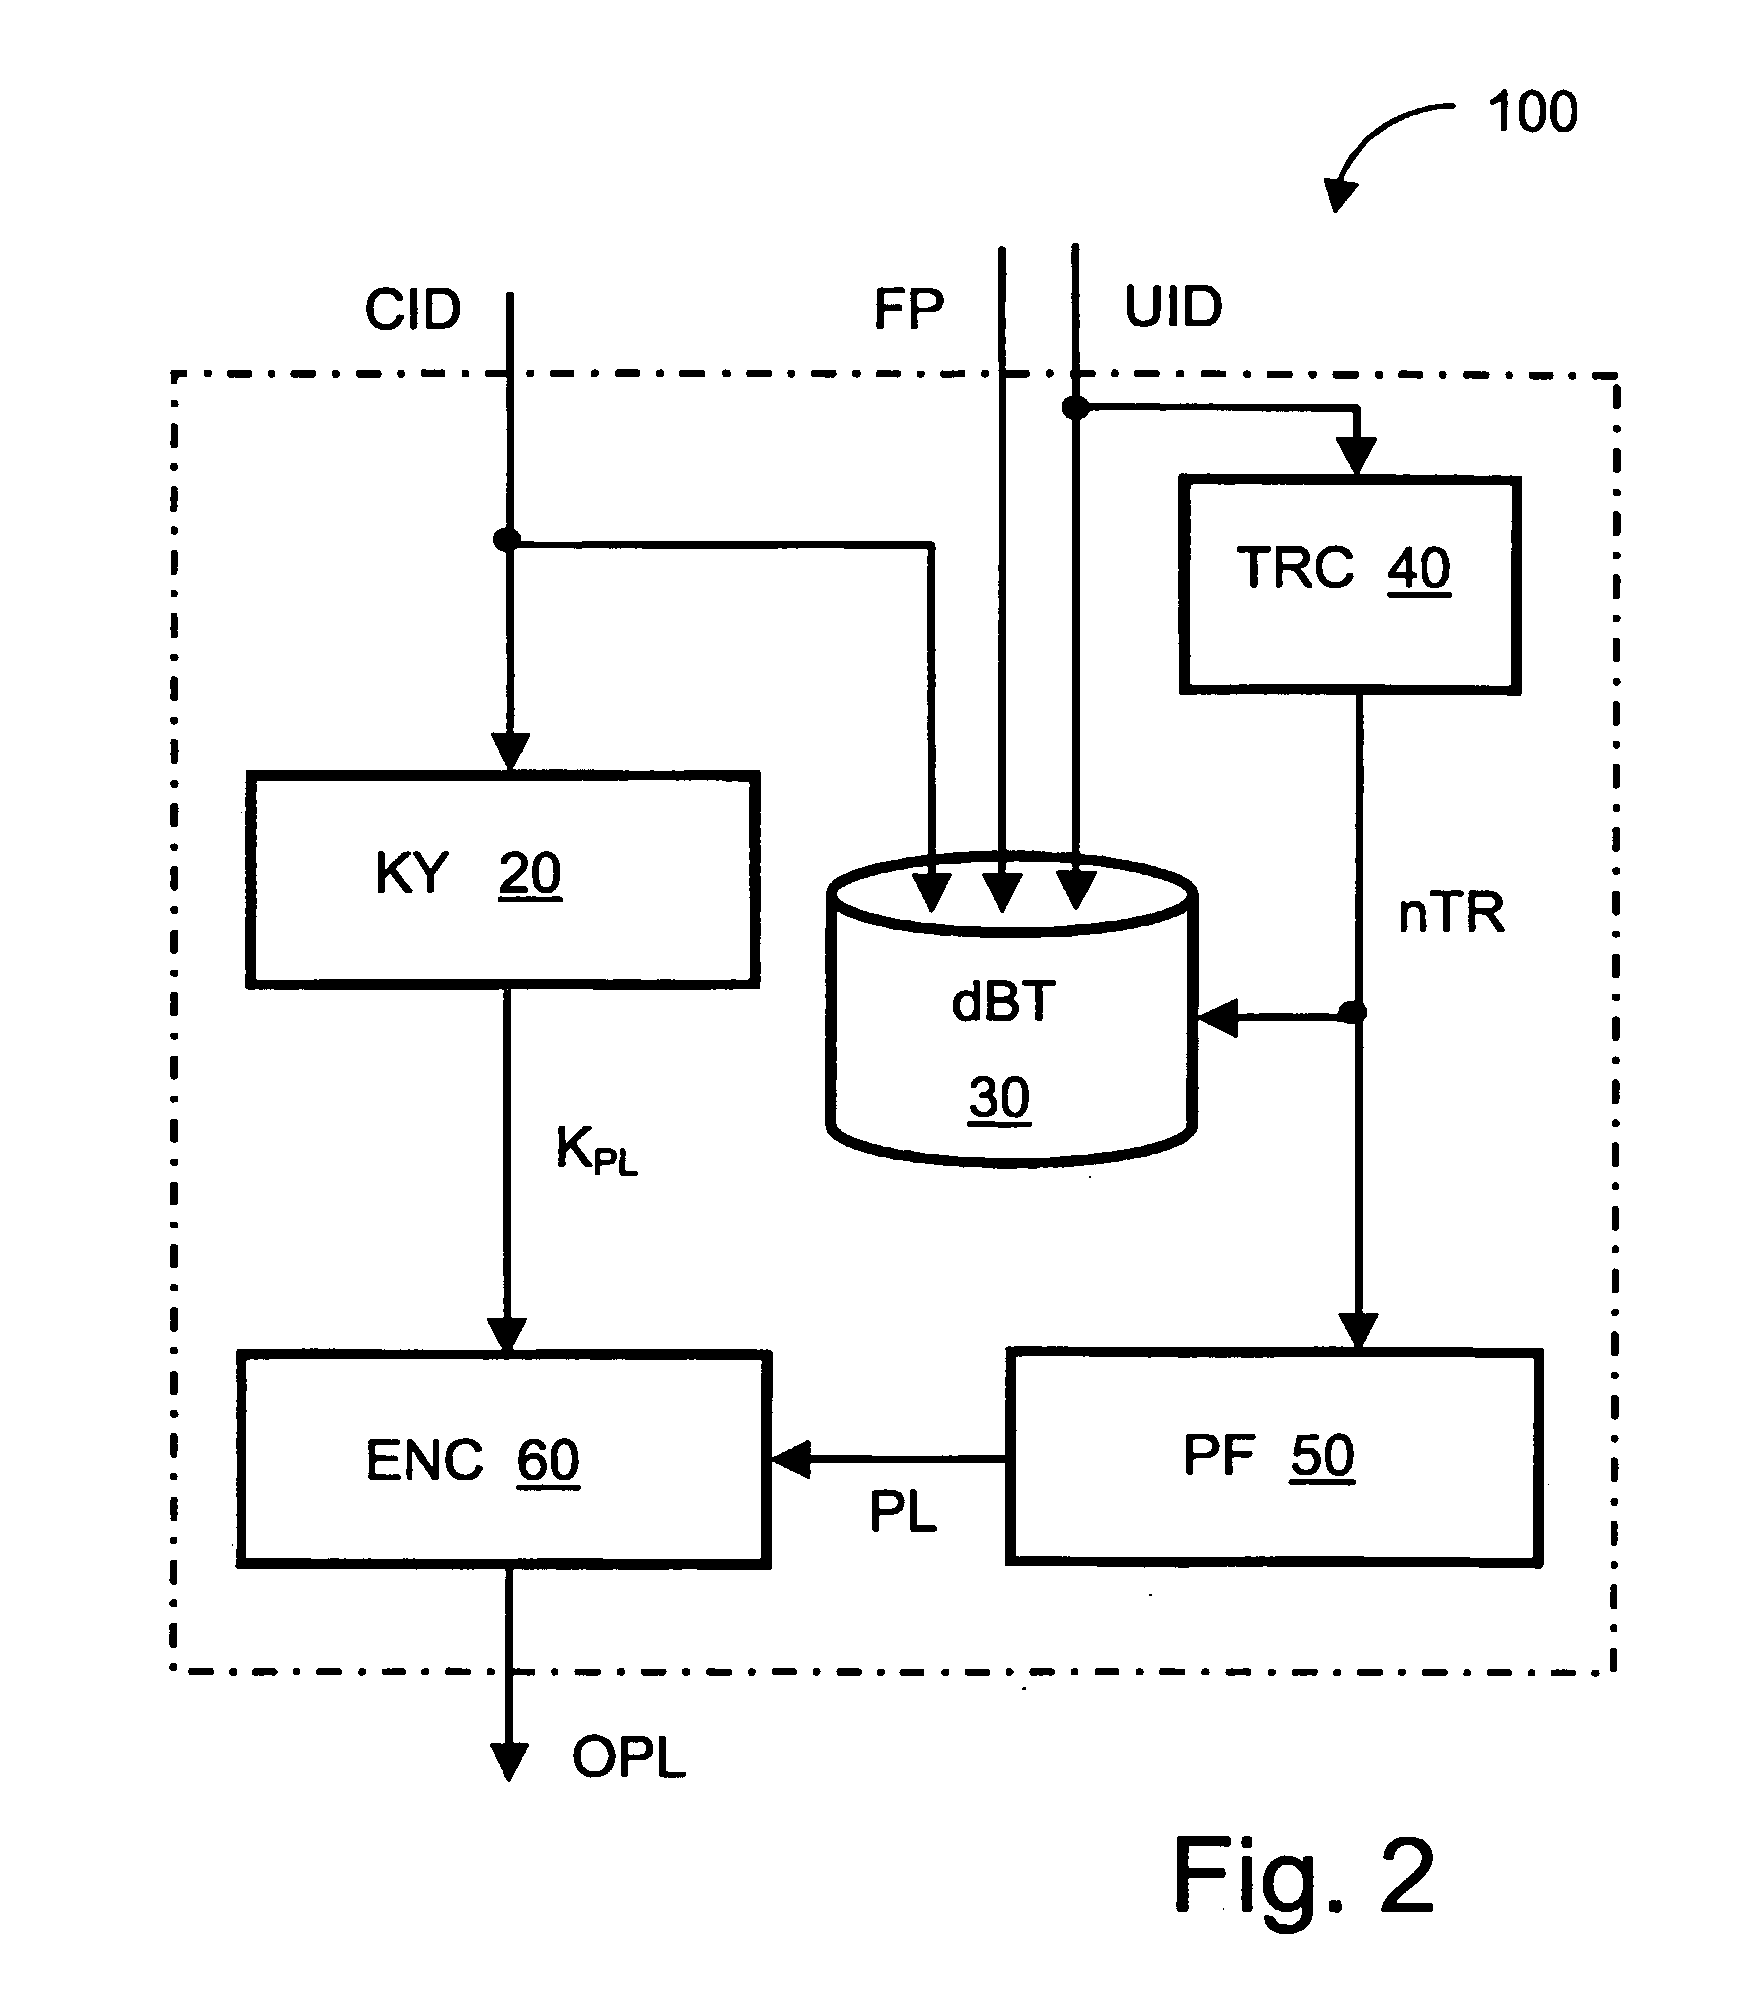 Method of allocating optimal payload space